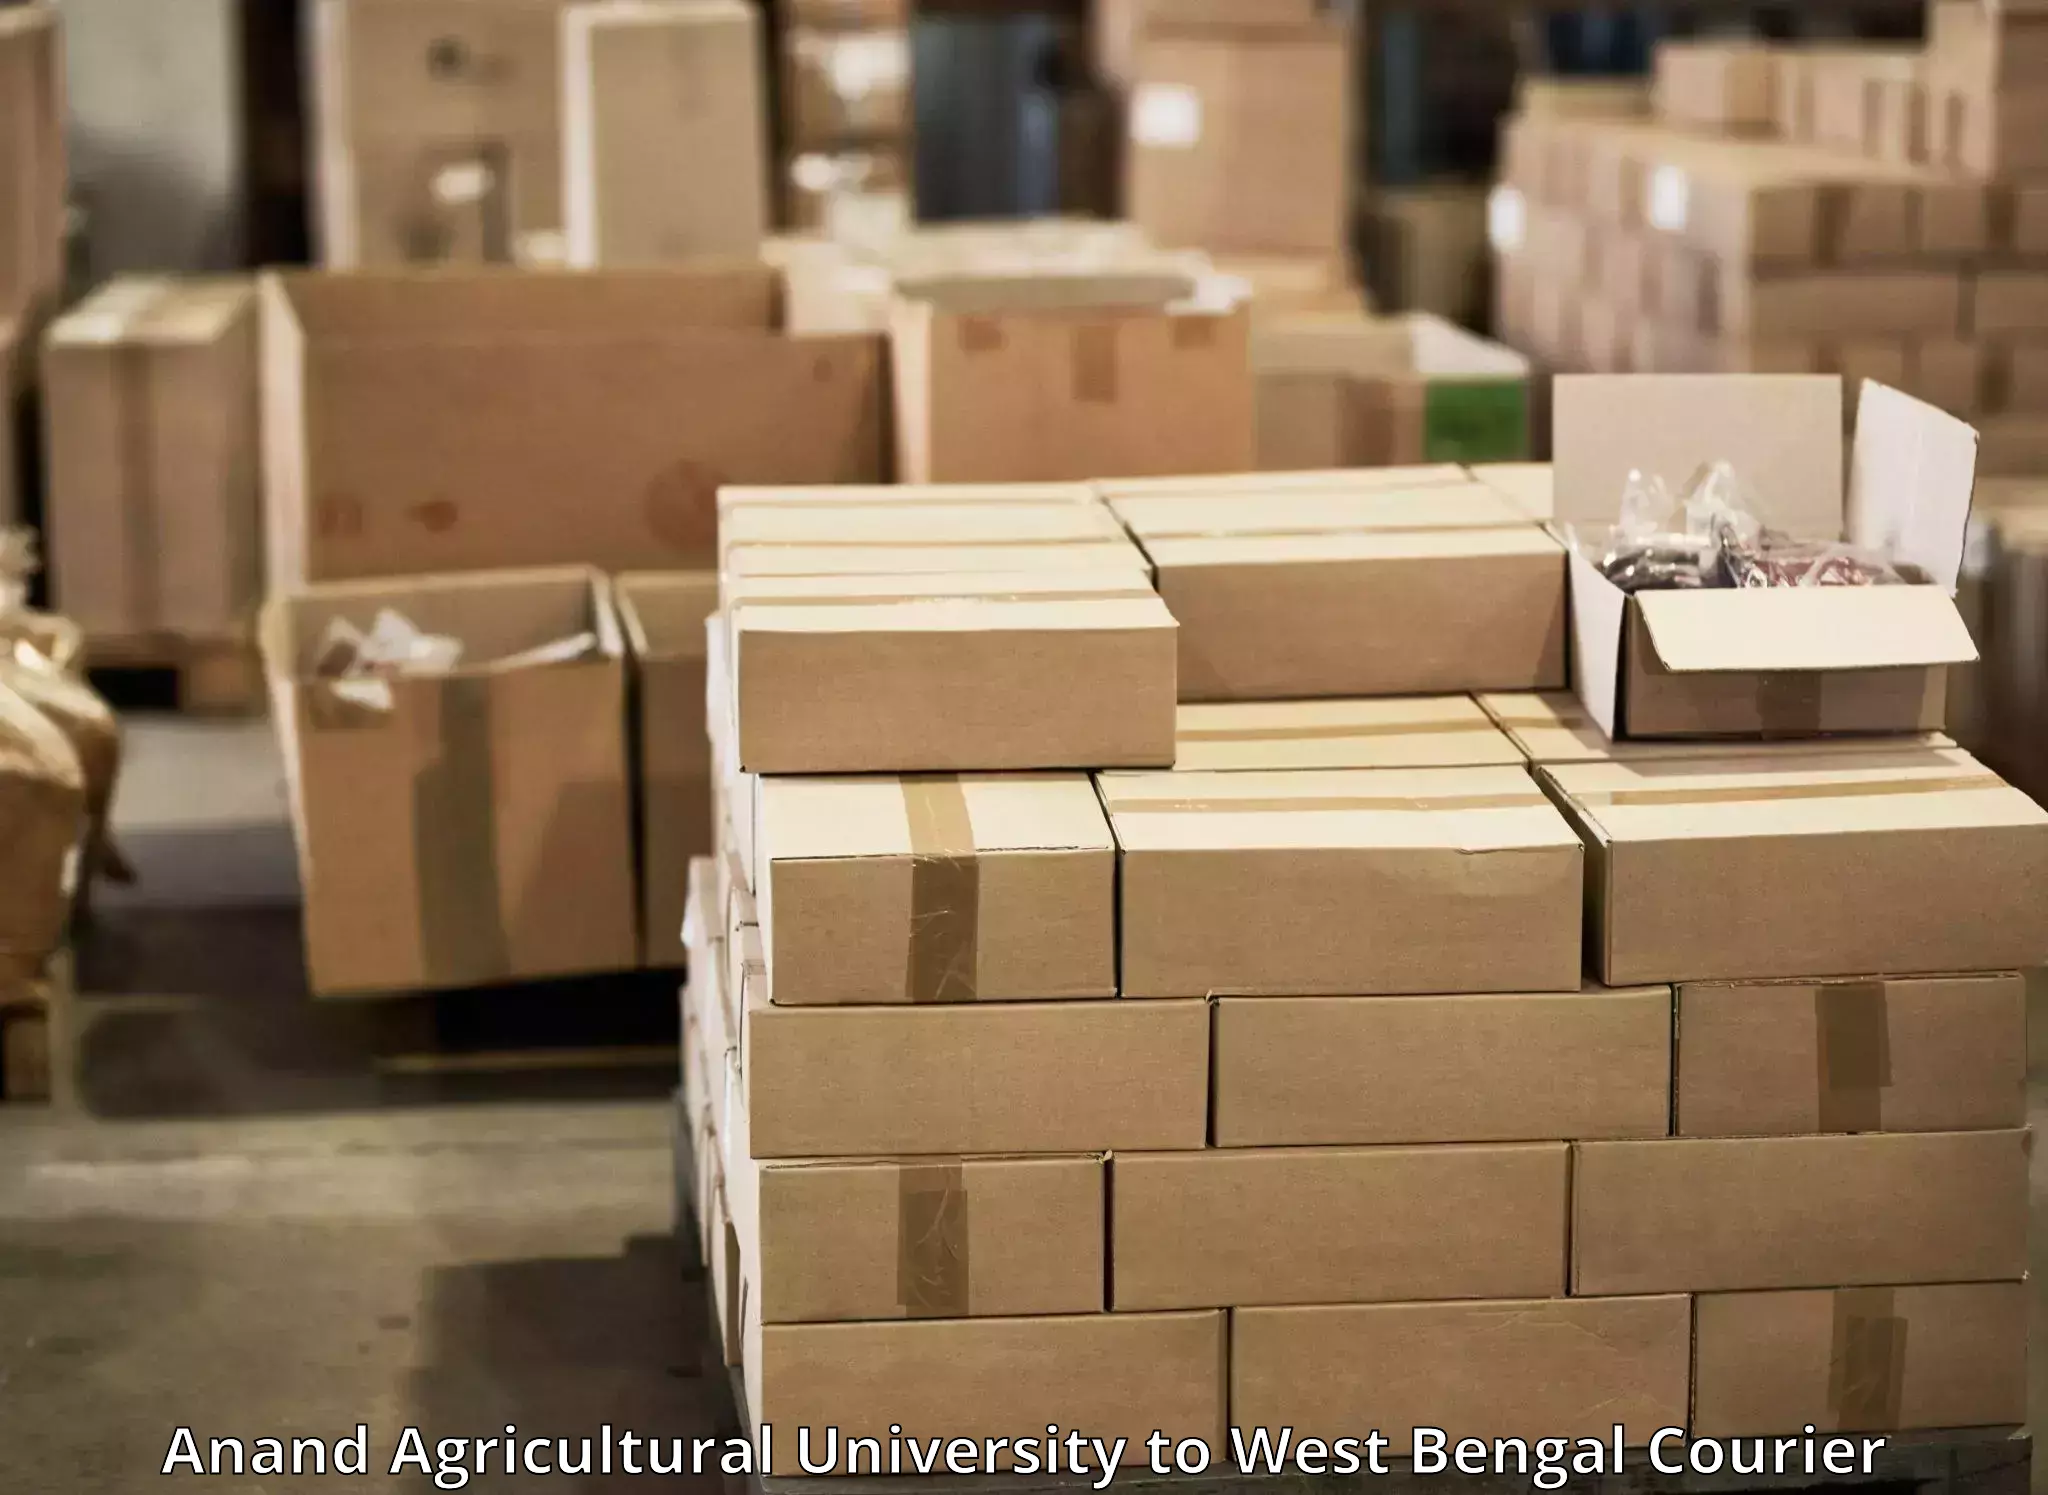 Express logistics service Anand Agricultural University to Panagarh